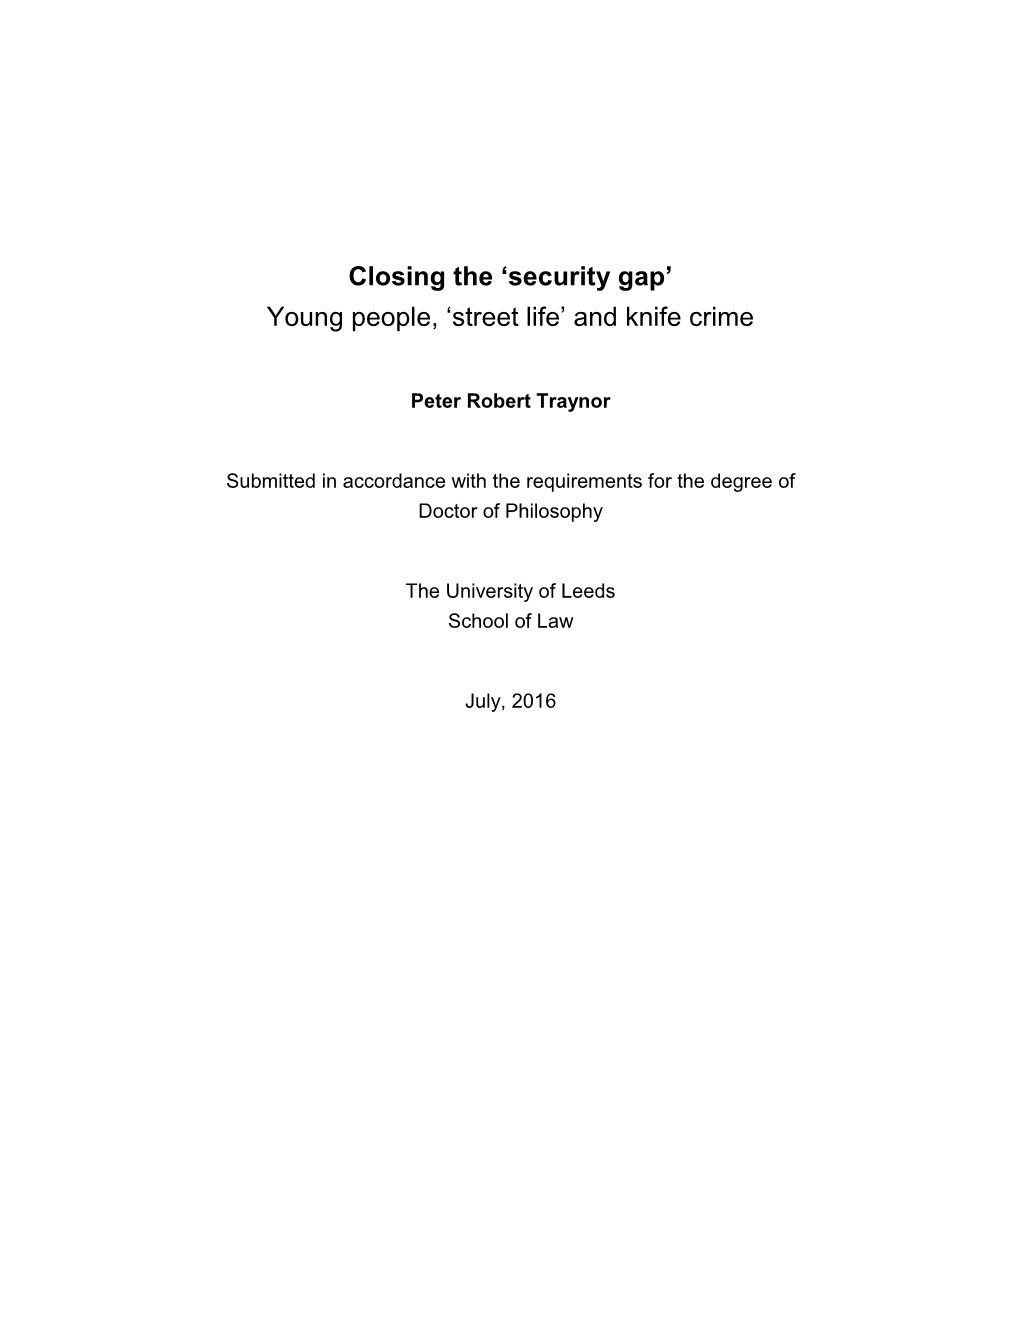 Closing the 'Security Gap' Young People, 'Street Life' and Knife Crime